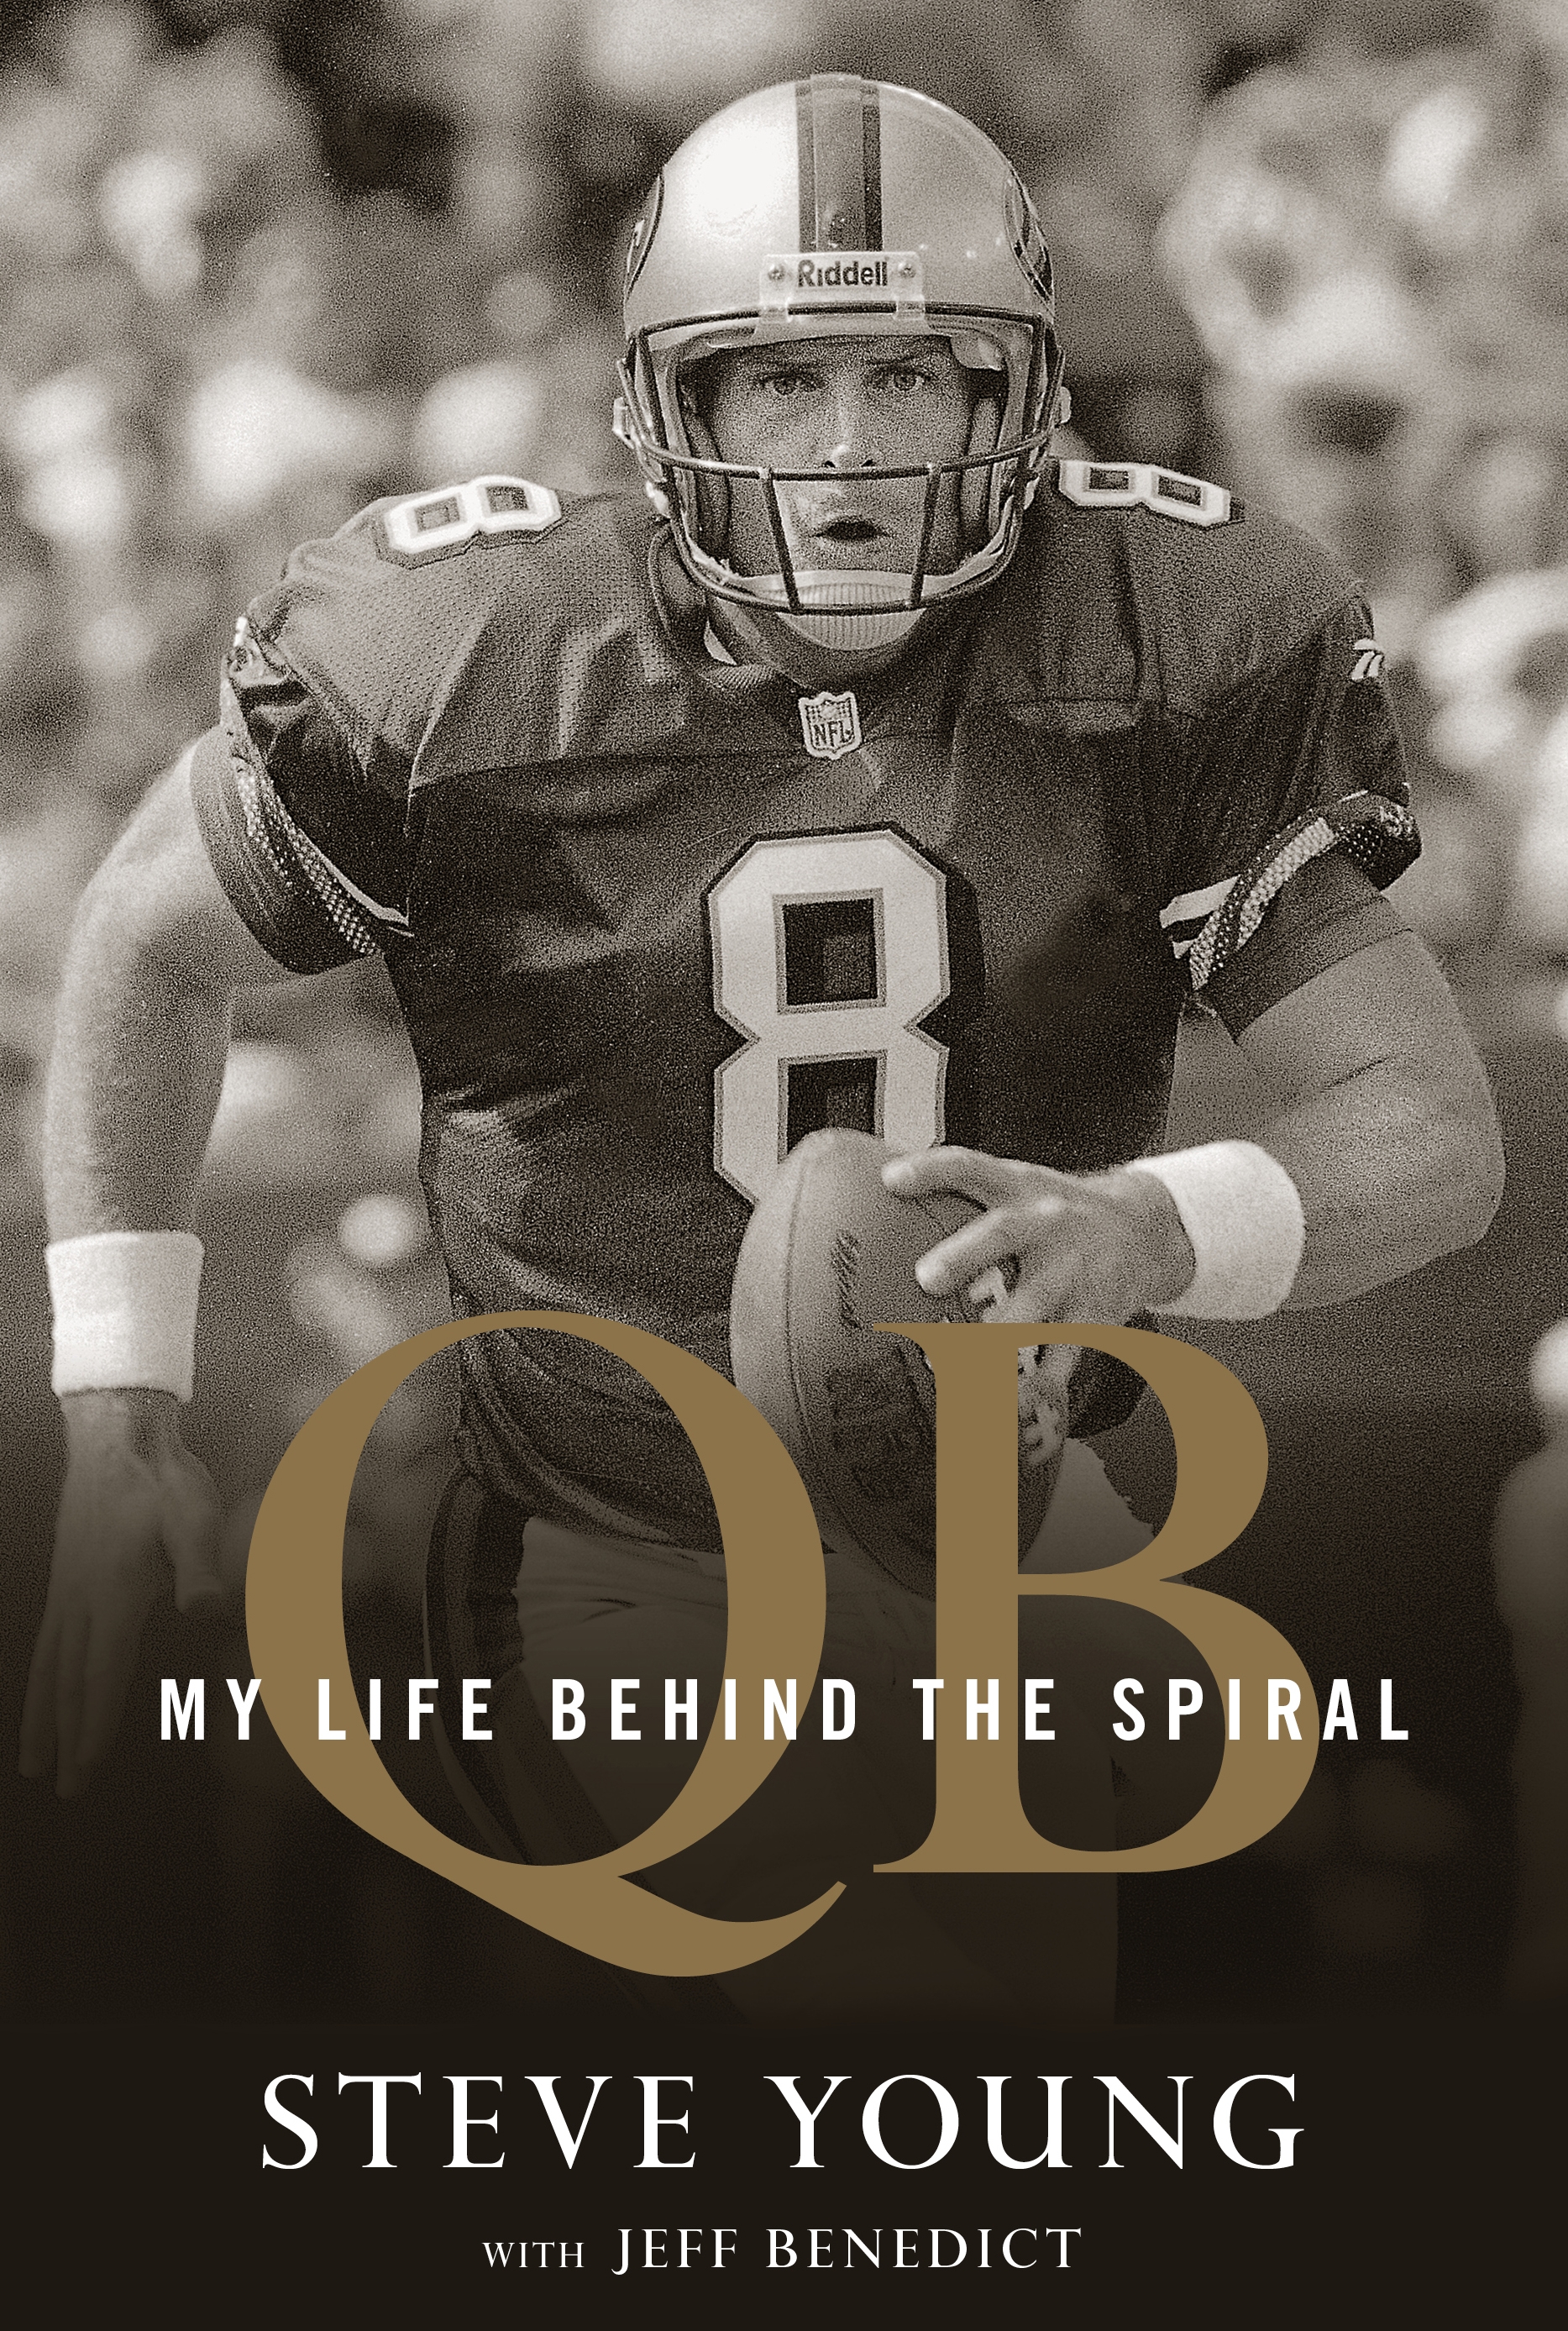 Steve Young's autobiography